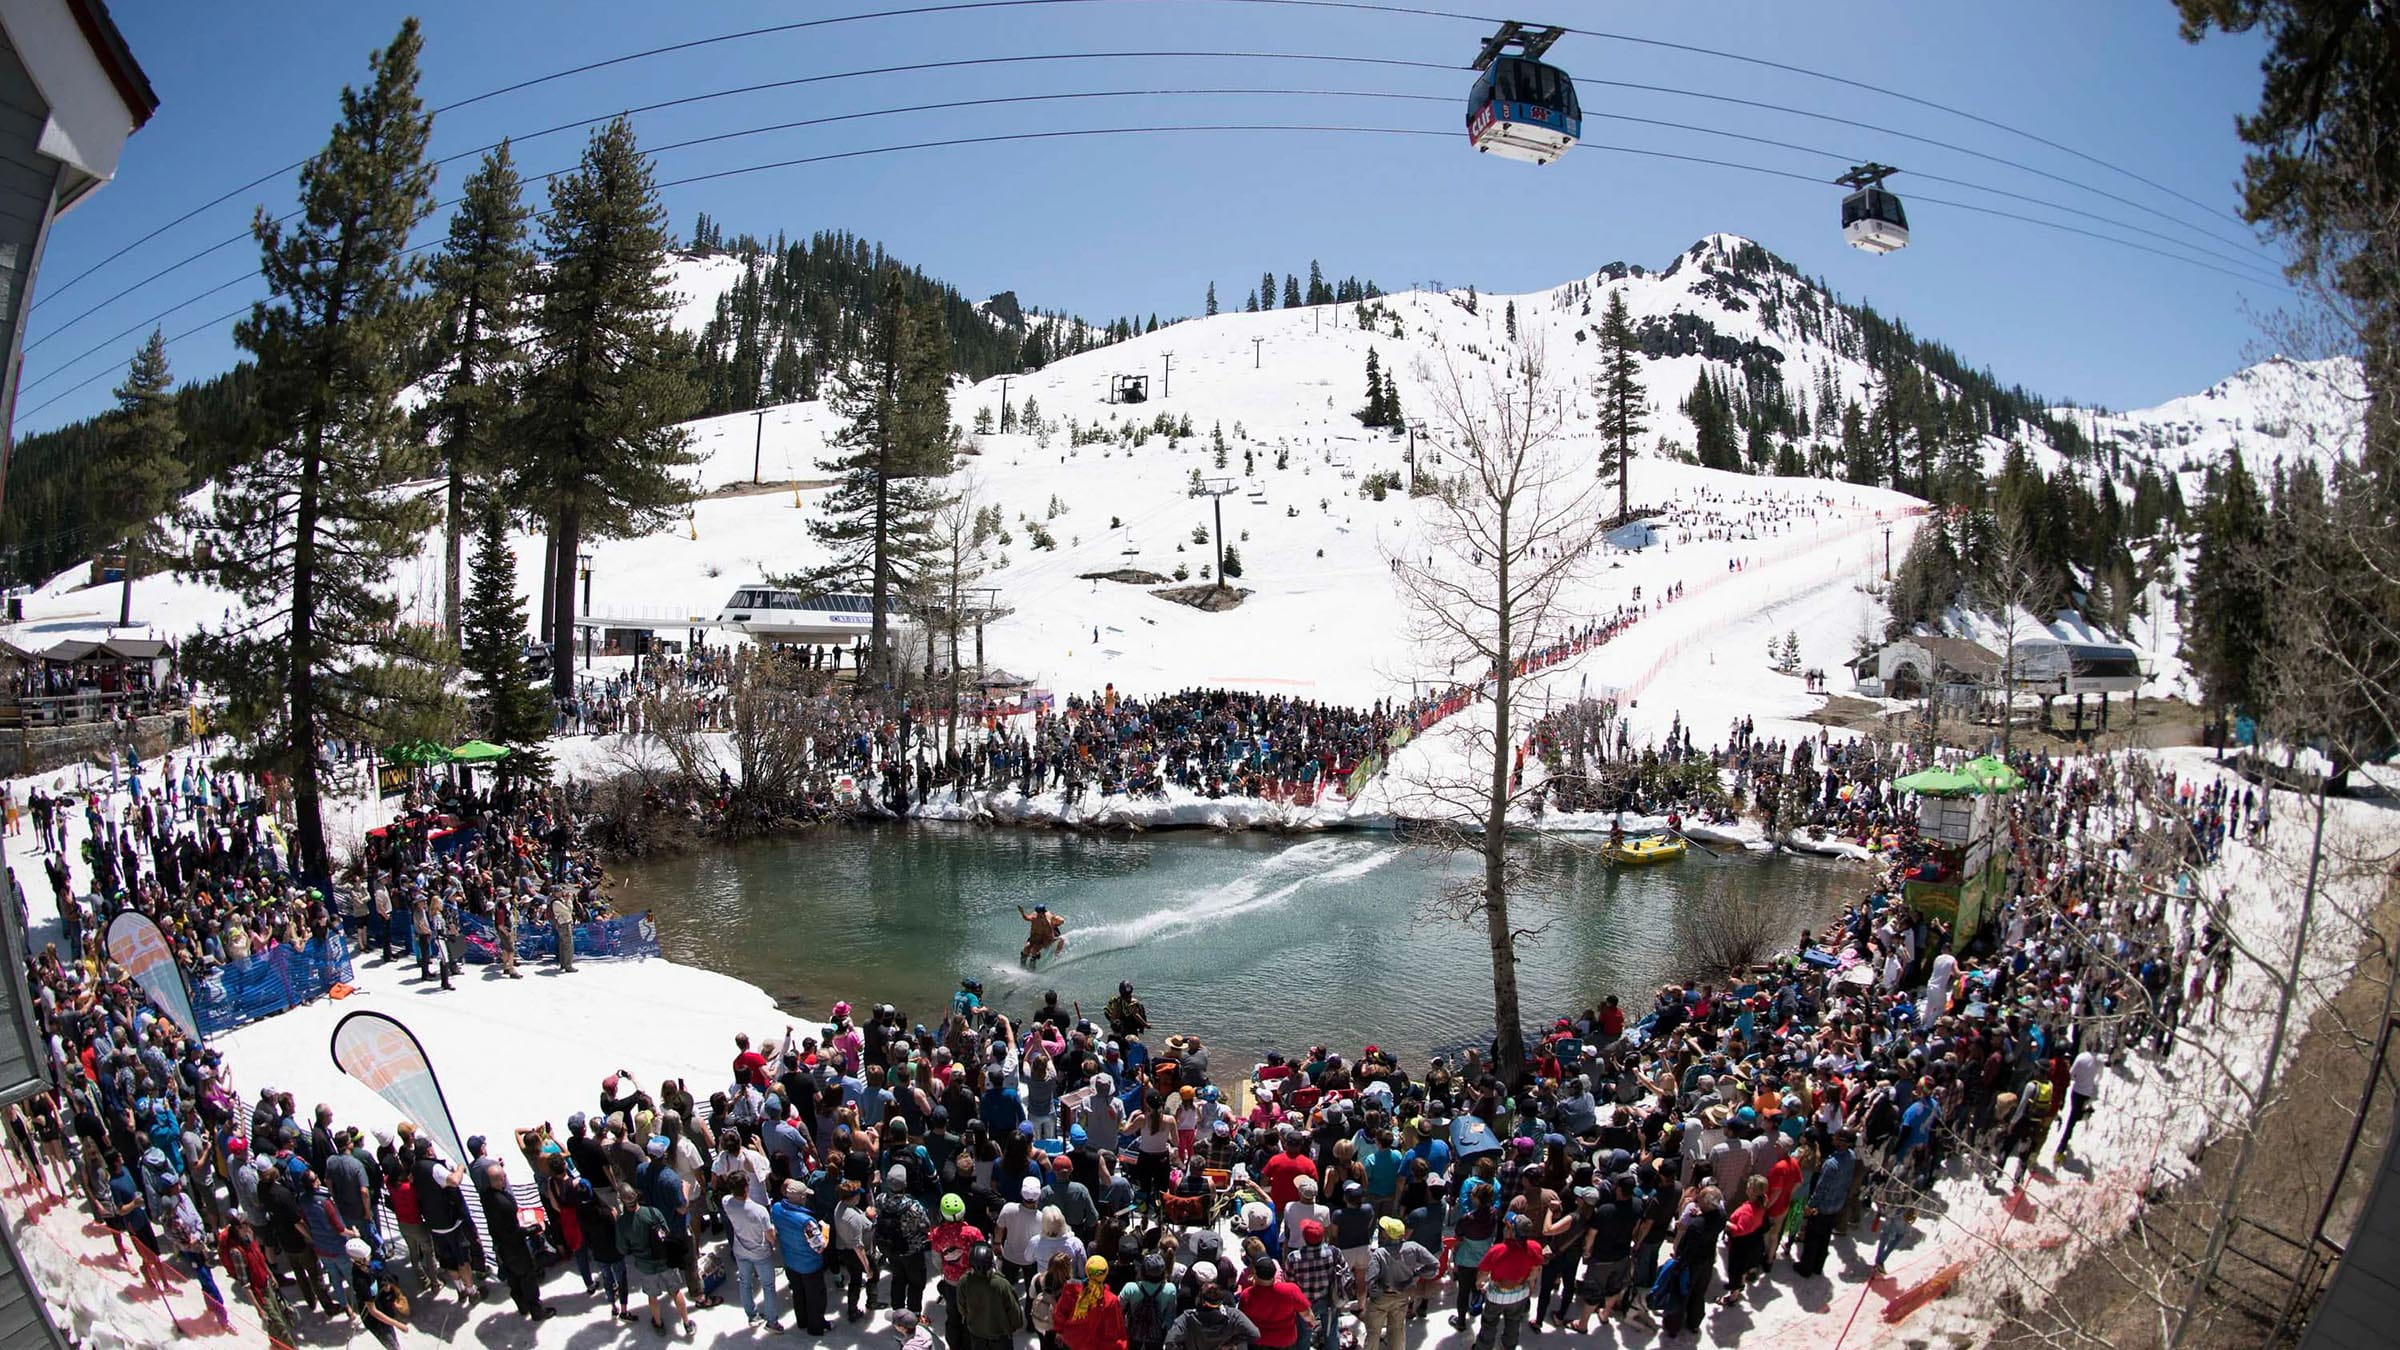 View of the Cushing Crossing, the original pond skimming event at Palisades Tahoe